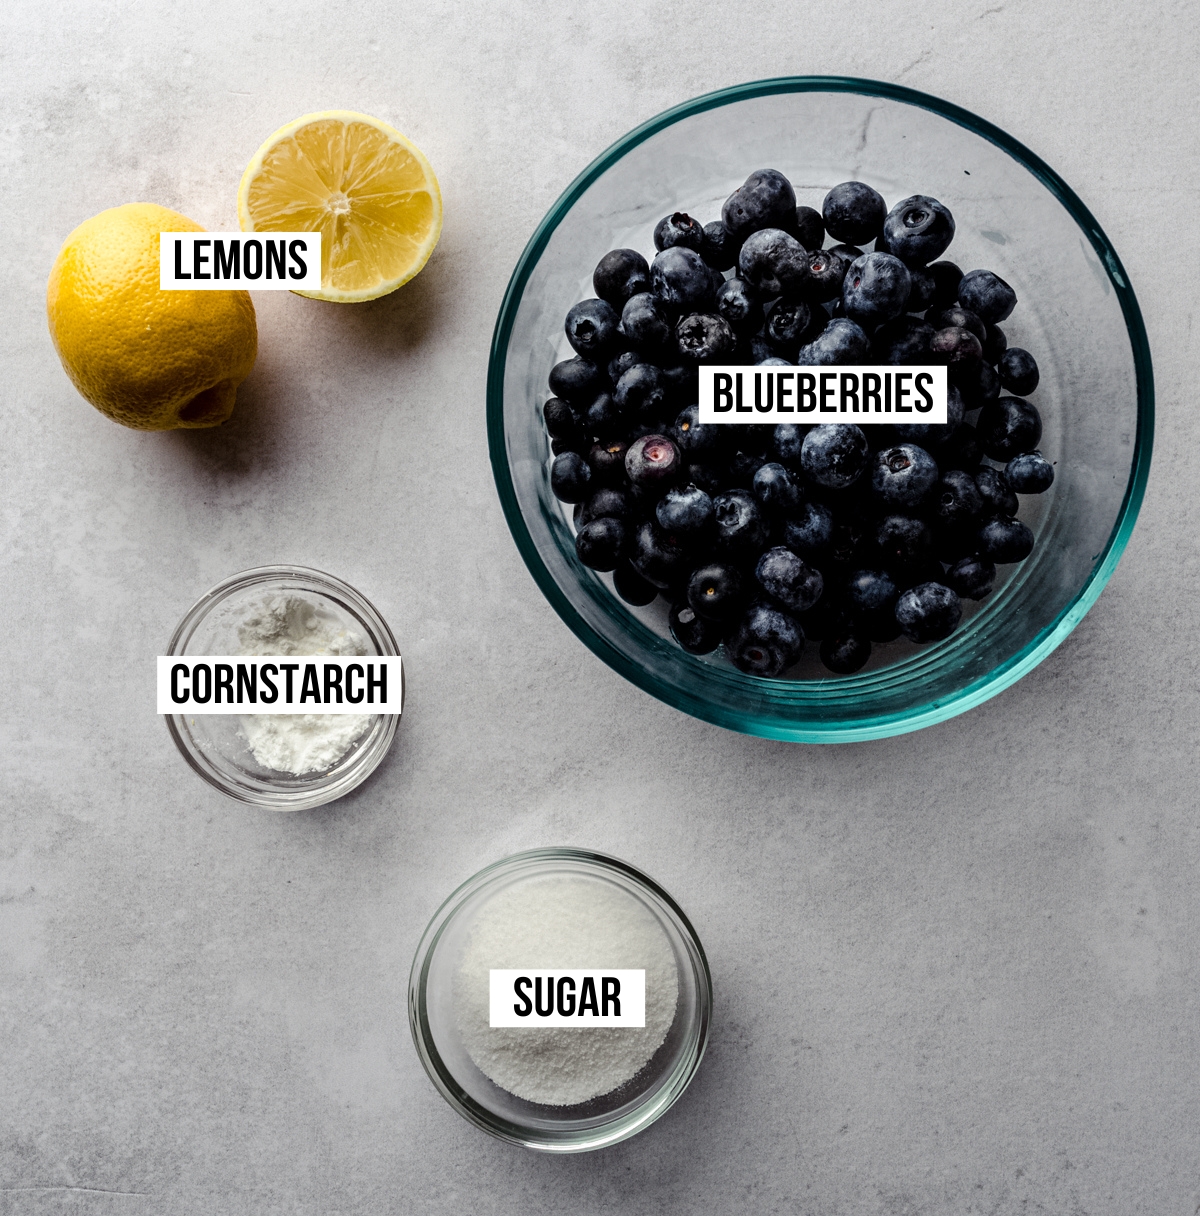 Aerial photo of ingredients for blueberry sauce with text overlay labeling each ingredient.